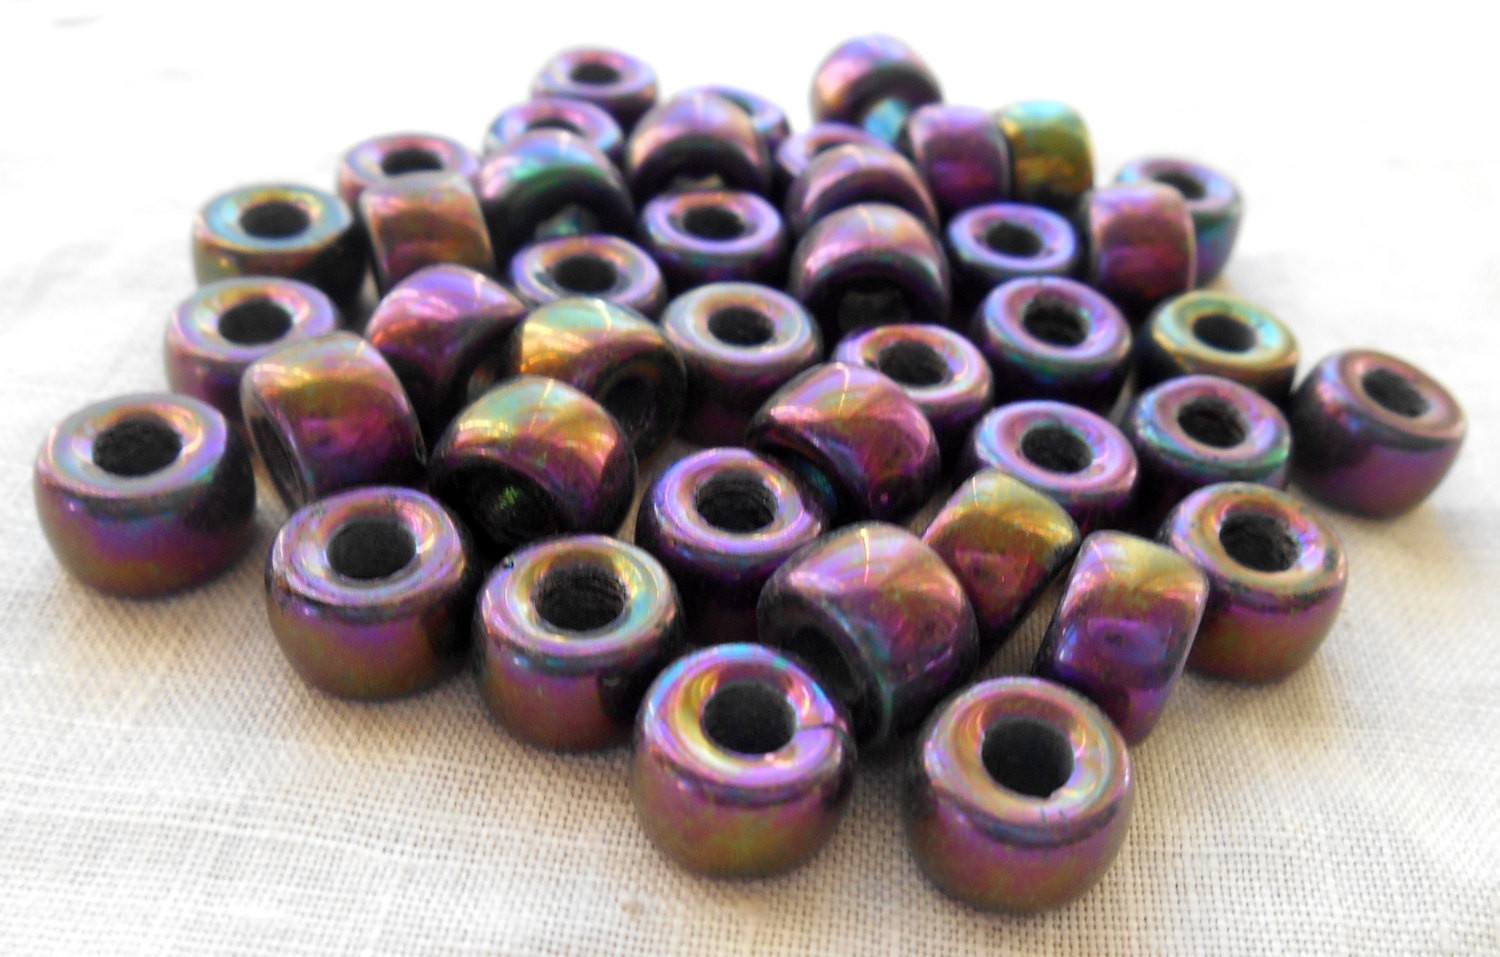 50 6mm Czech Matte Metallic Periwinkle Blue pony roller beads, large hole  glass crow beads, C6450 – Glorious Glass Beads